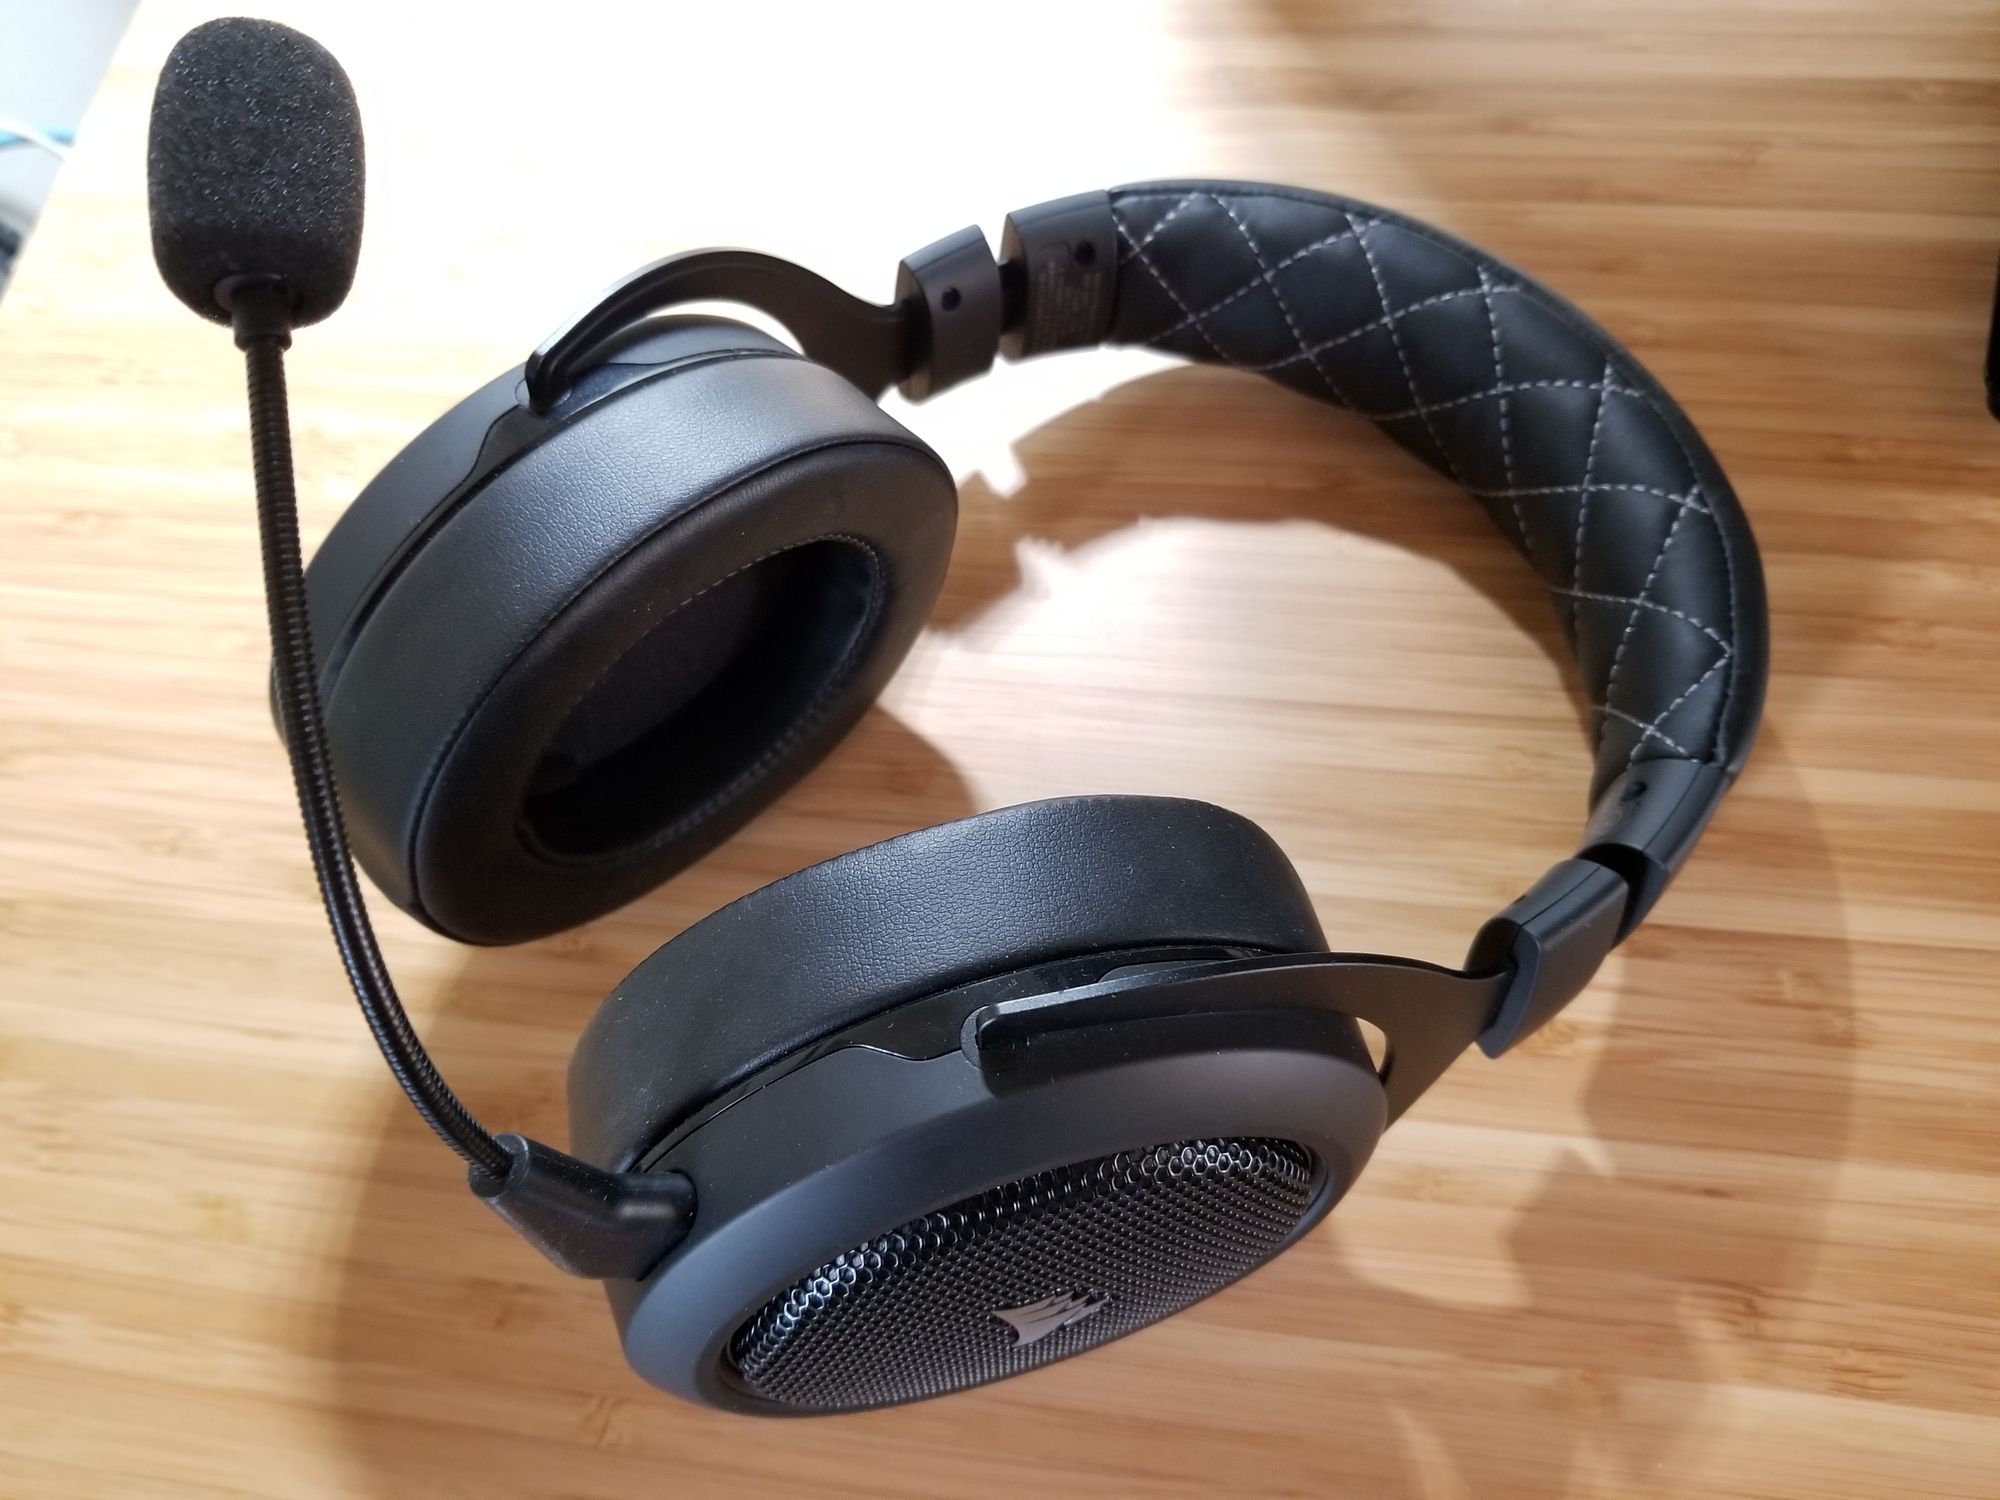 The Corsair HS70 Pro is a great choice for a (gaming) headset on Linux.